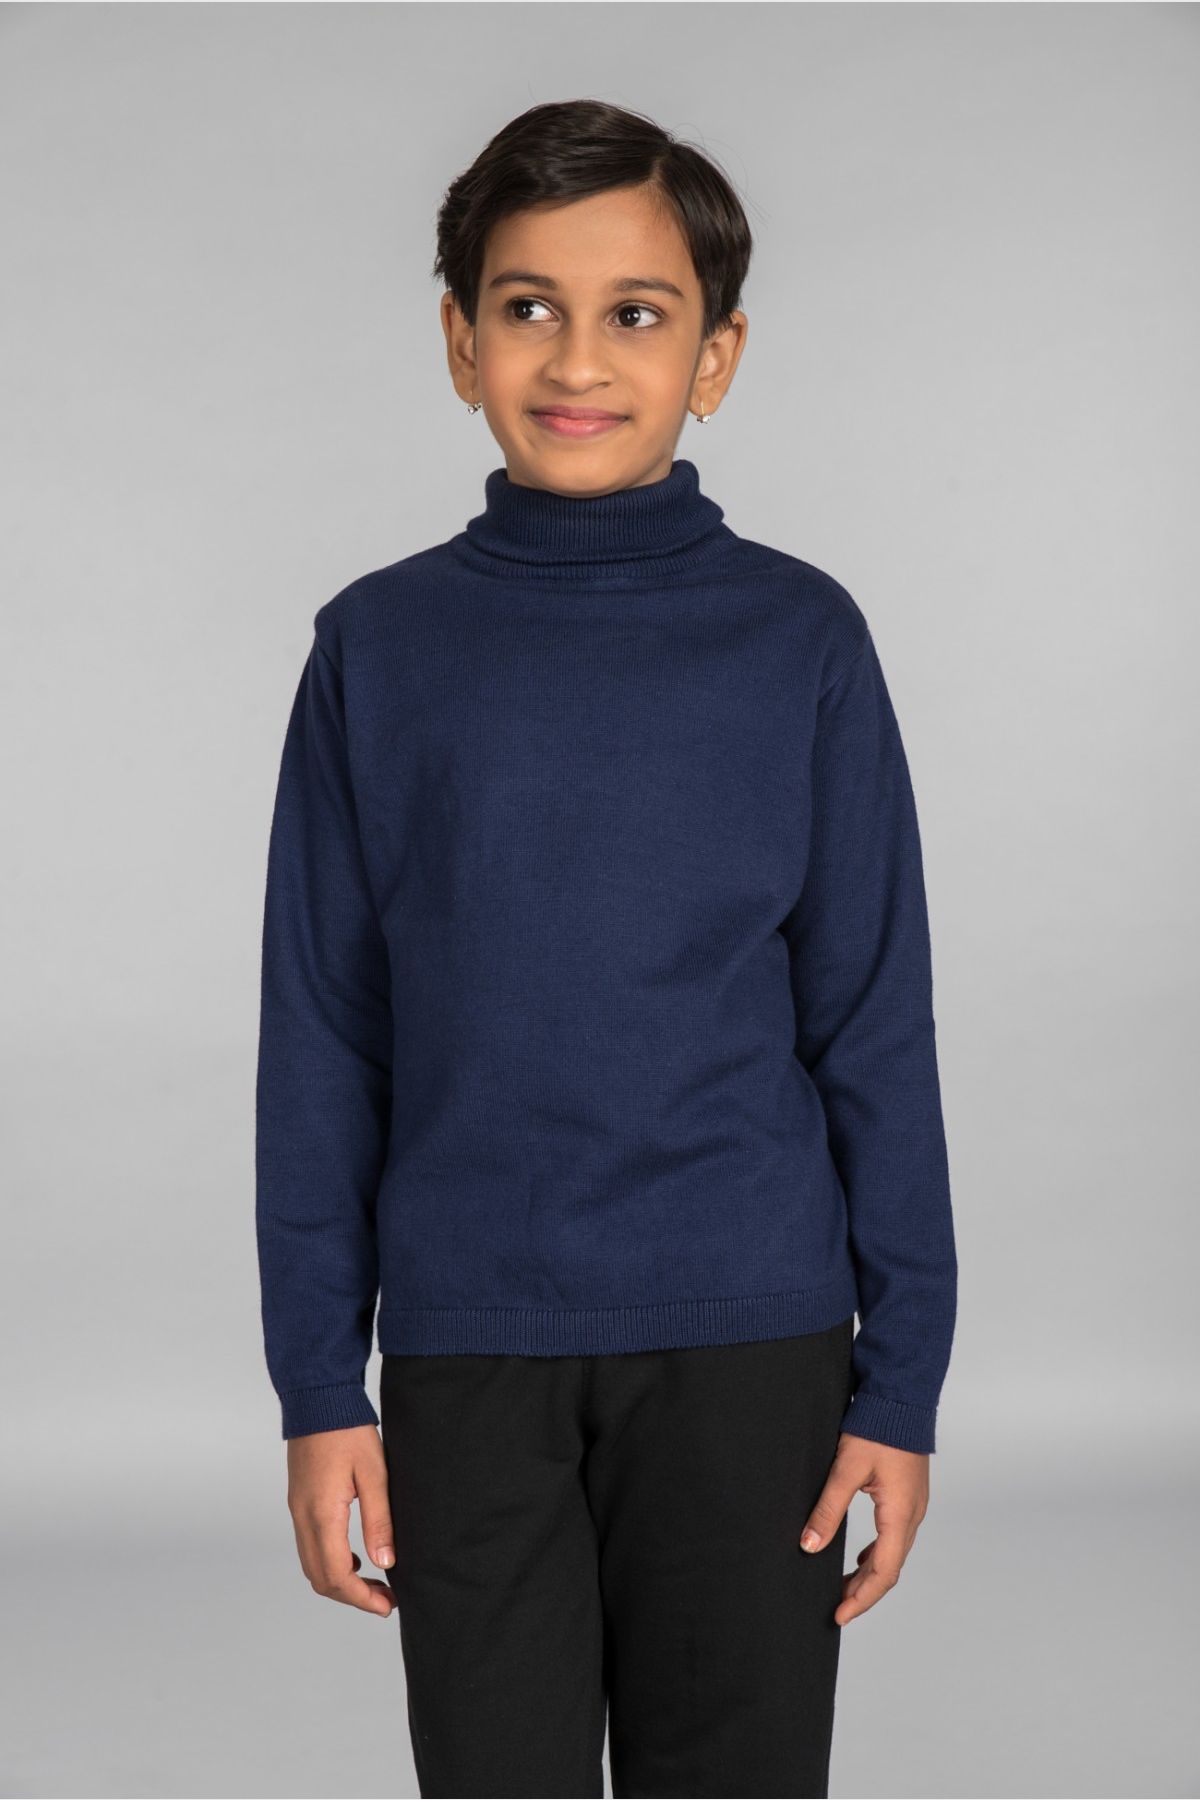 Buy High Neck Cotton Pullover for Girls Navy Sweaters for Girls ...